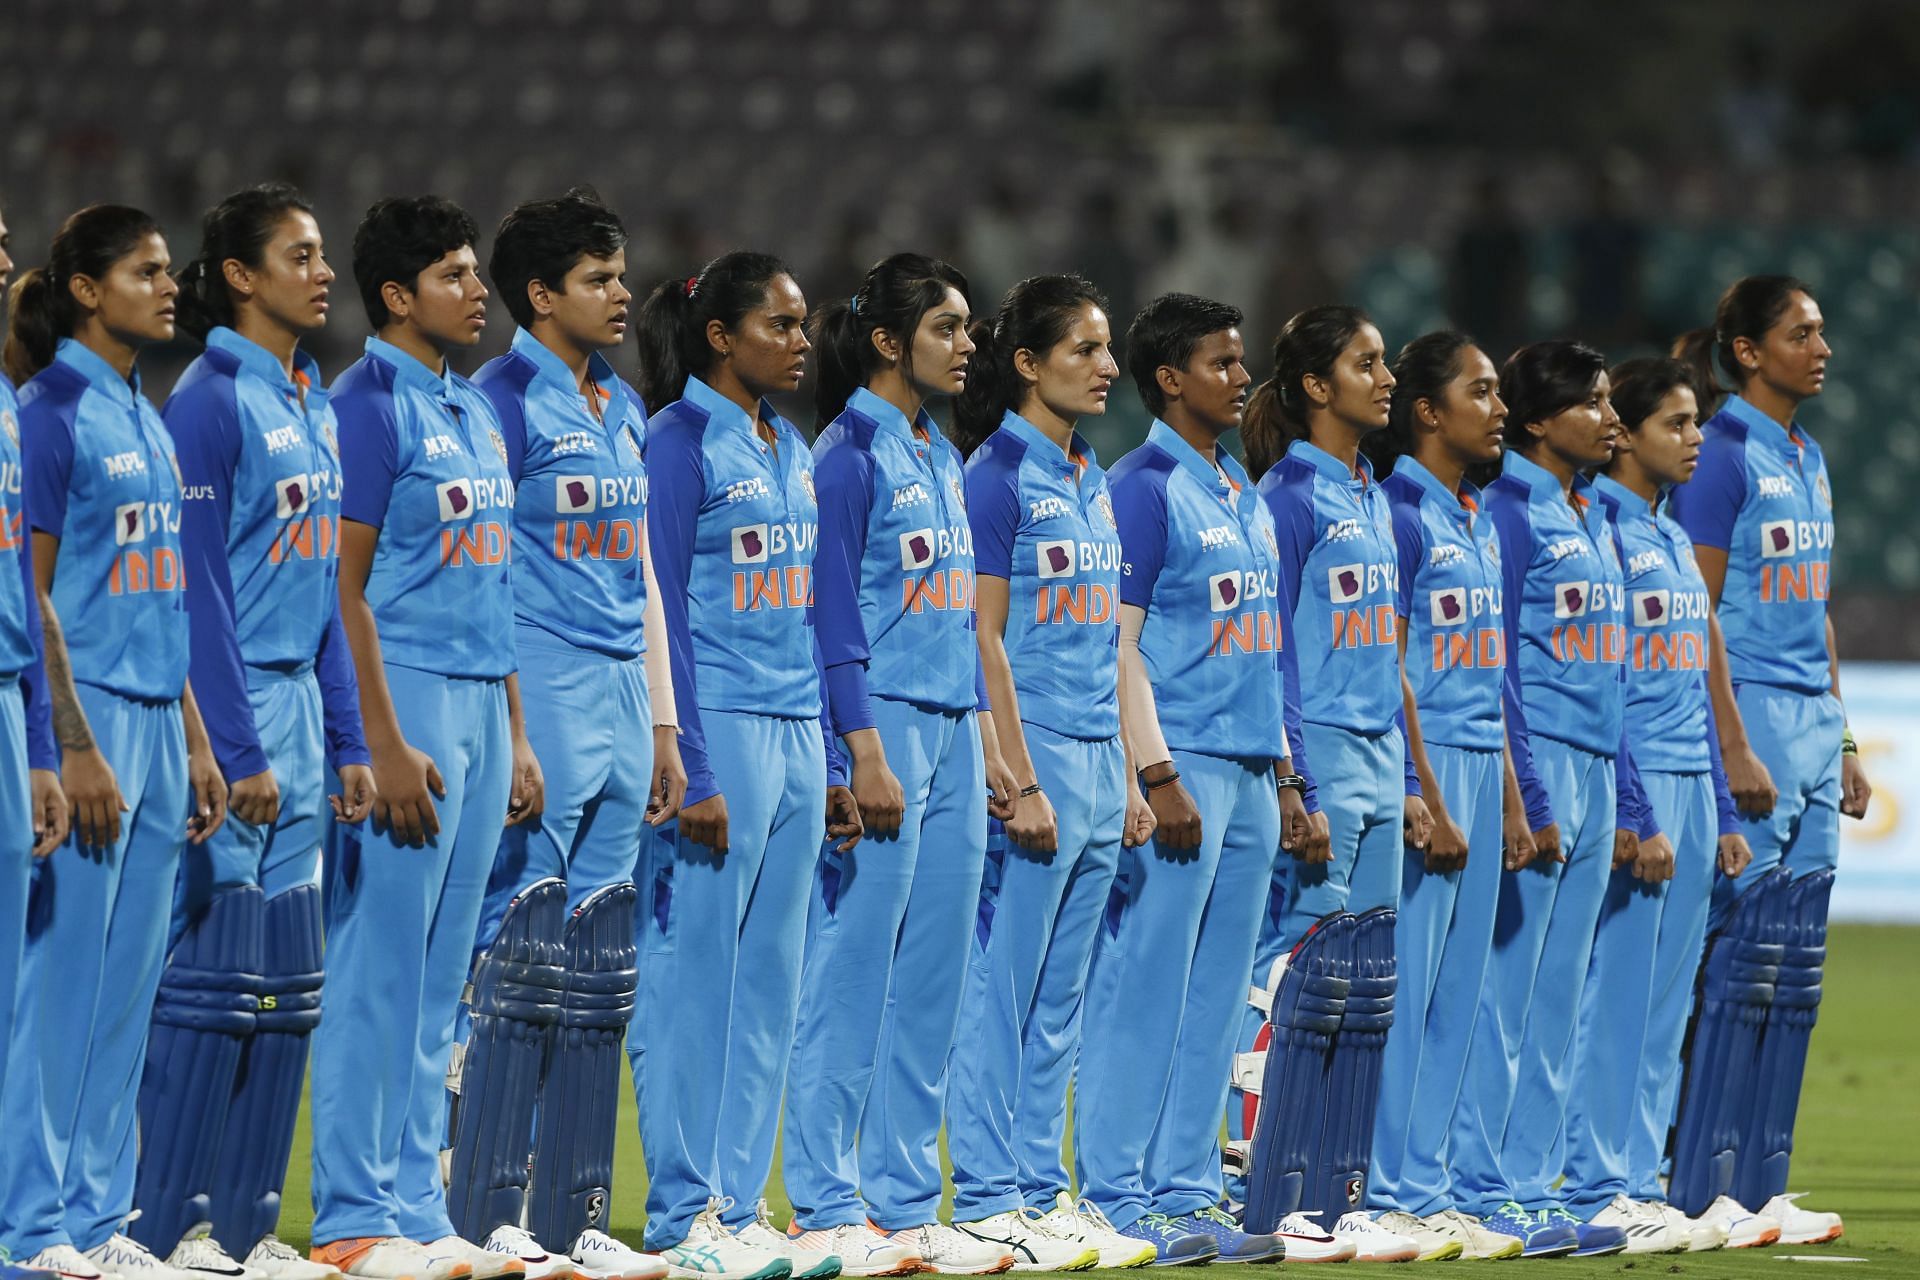 Inaugural season of Women's IPL likely to be held from March 3 to 26: Reports